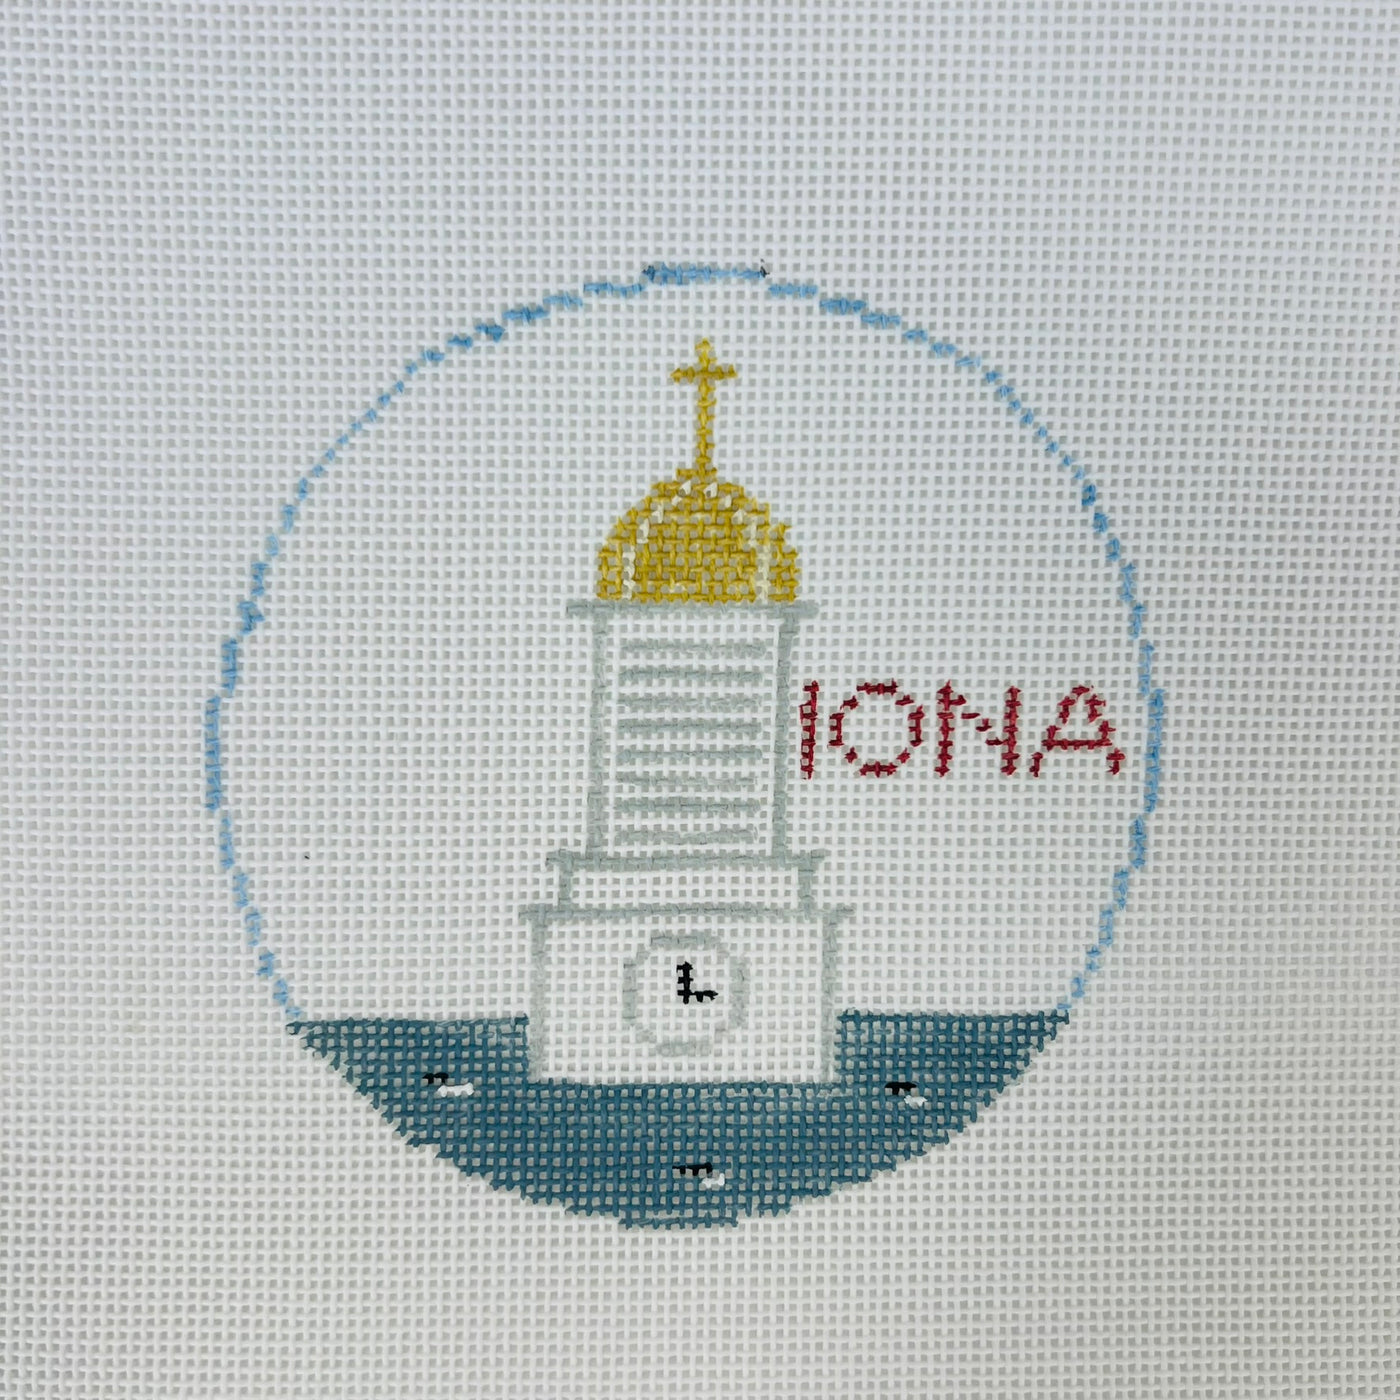 Iona College Round Ornament Needlepoint Canvas